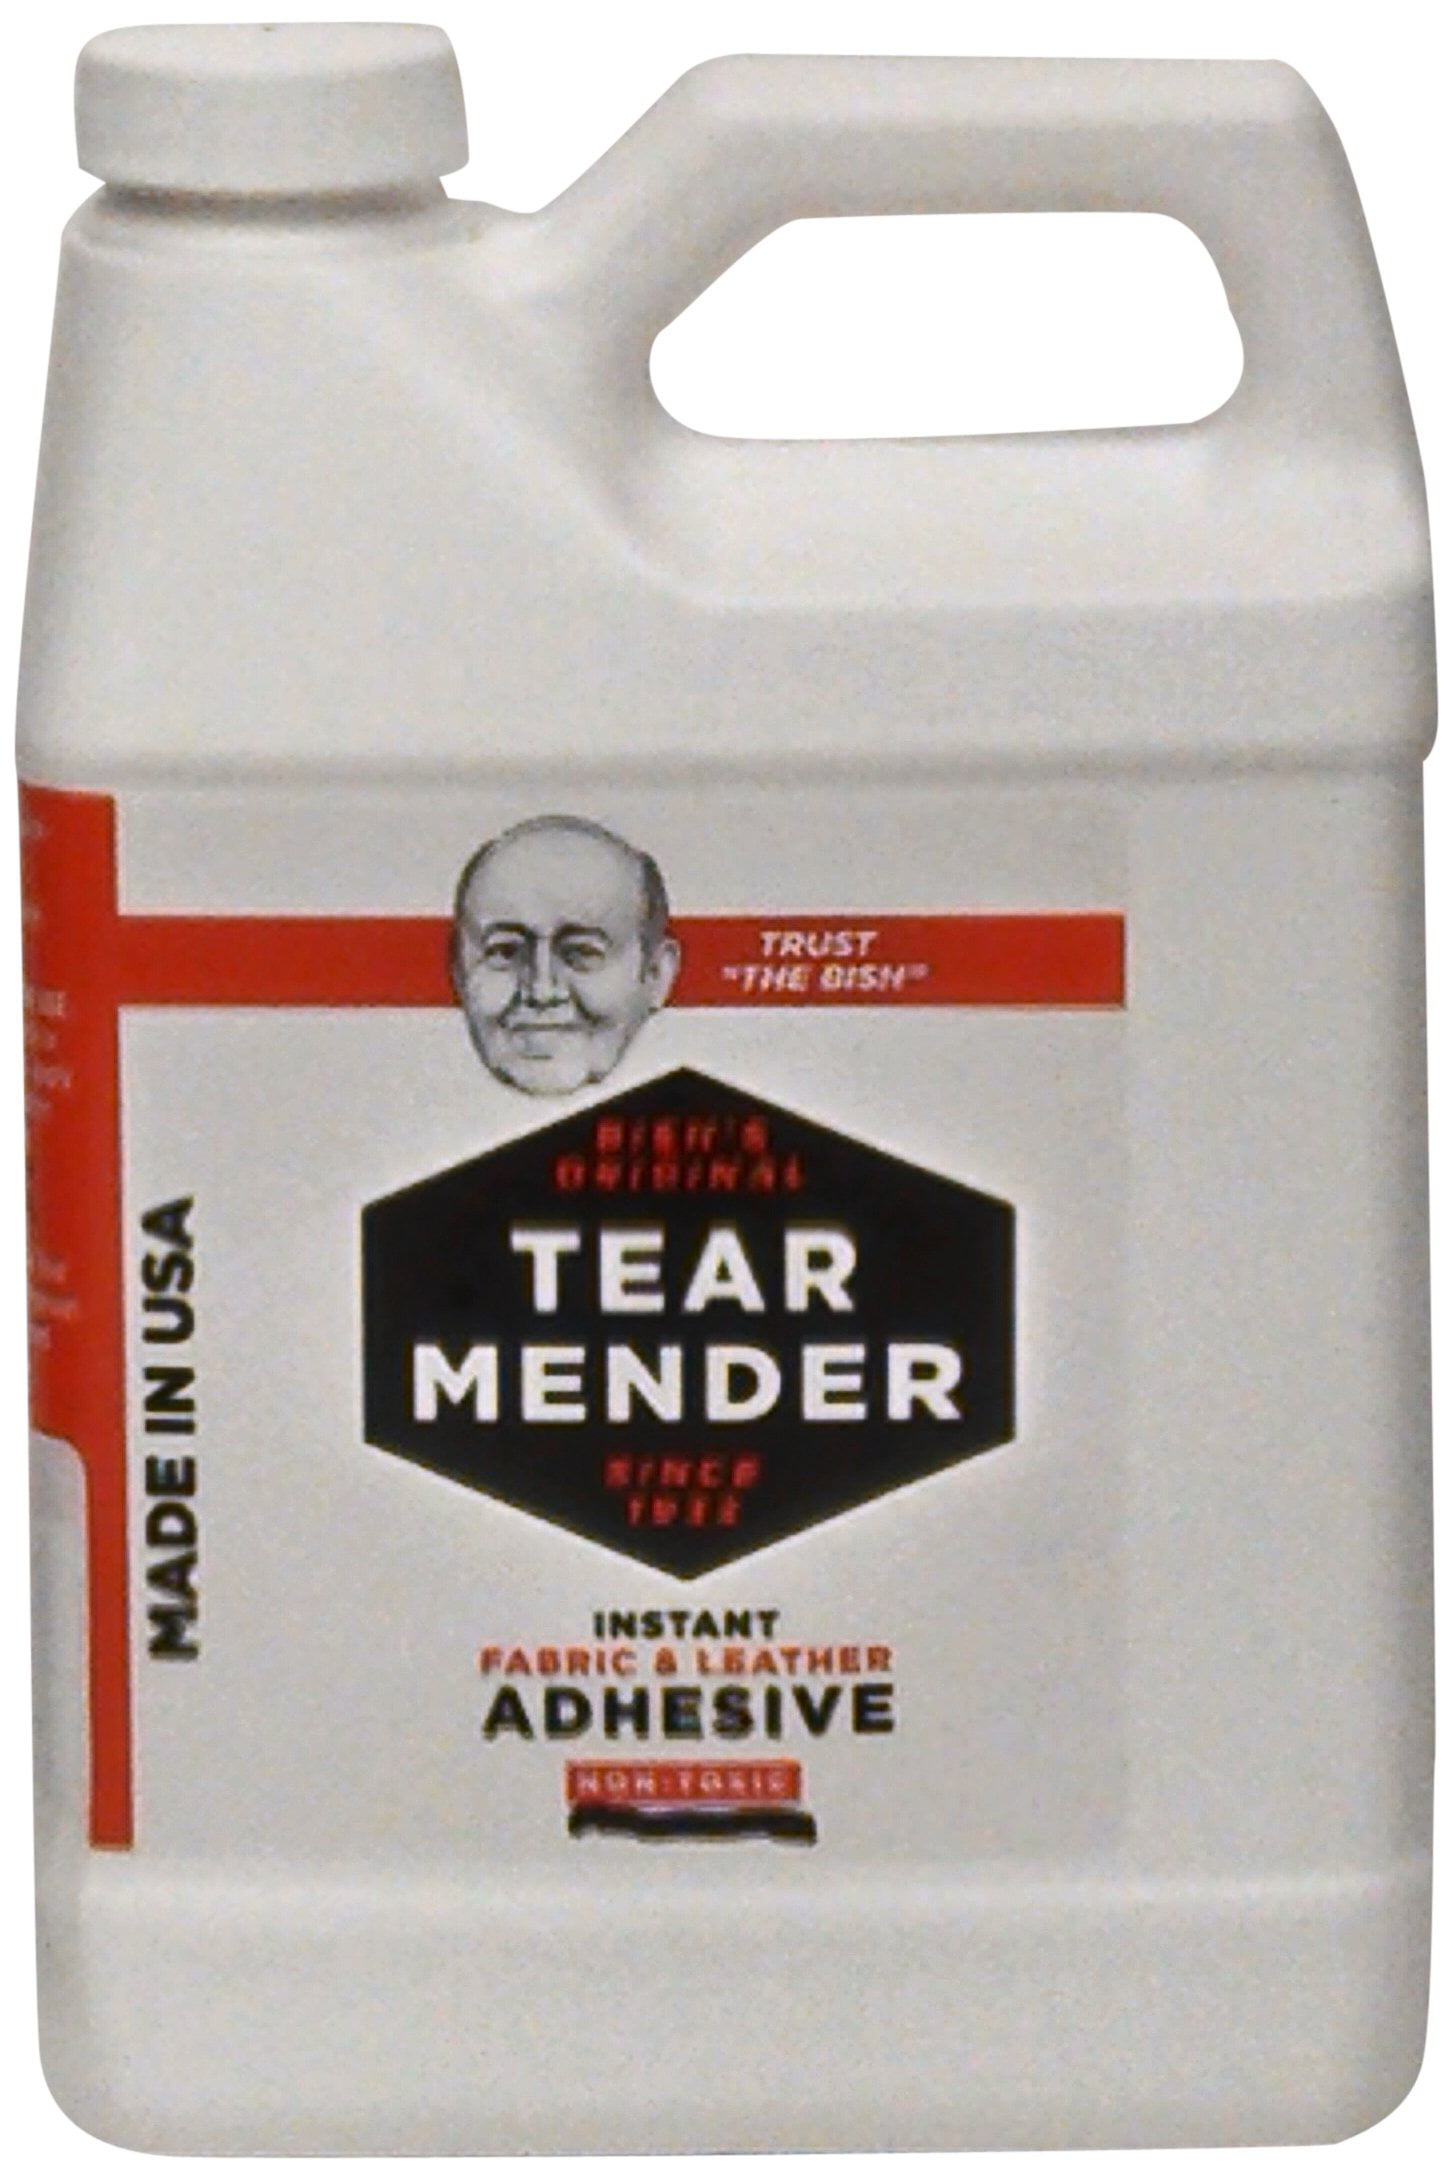 Tear Mender Fabric And Leather Adhesive Glue, Leather & Suede Glue 60ml